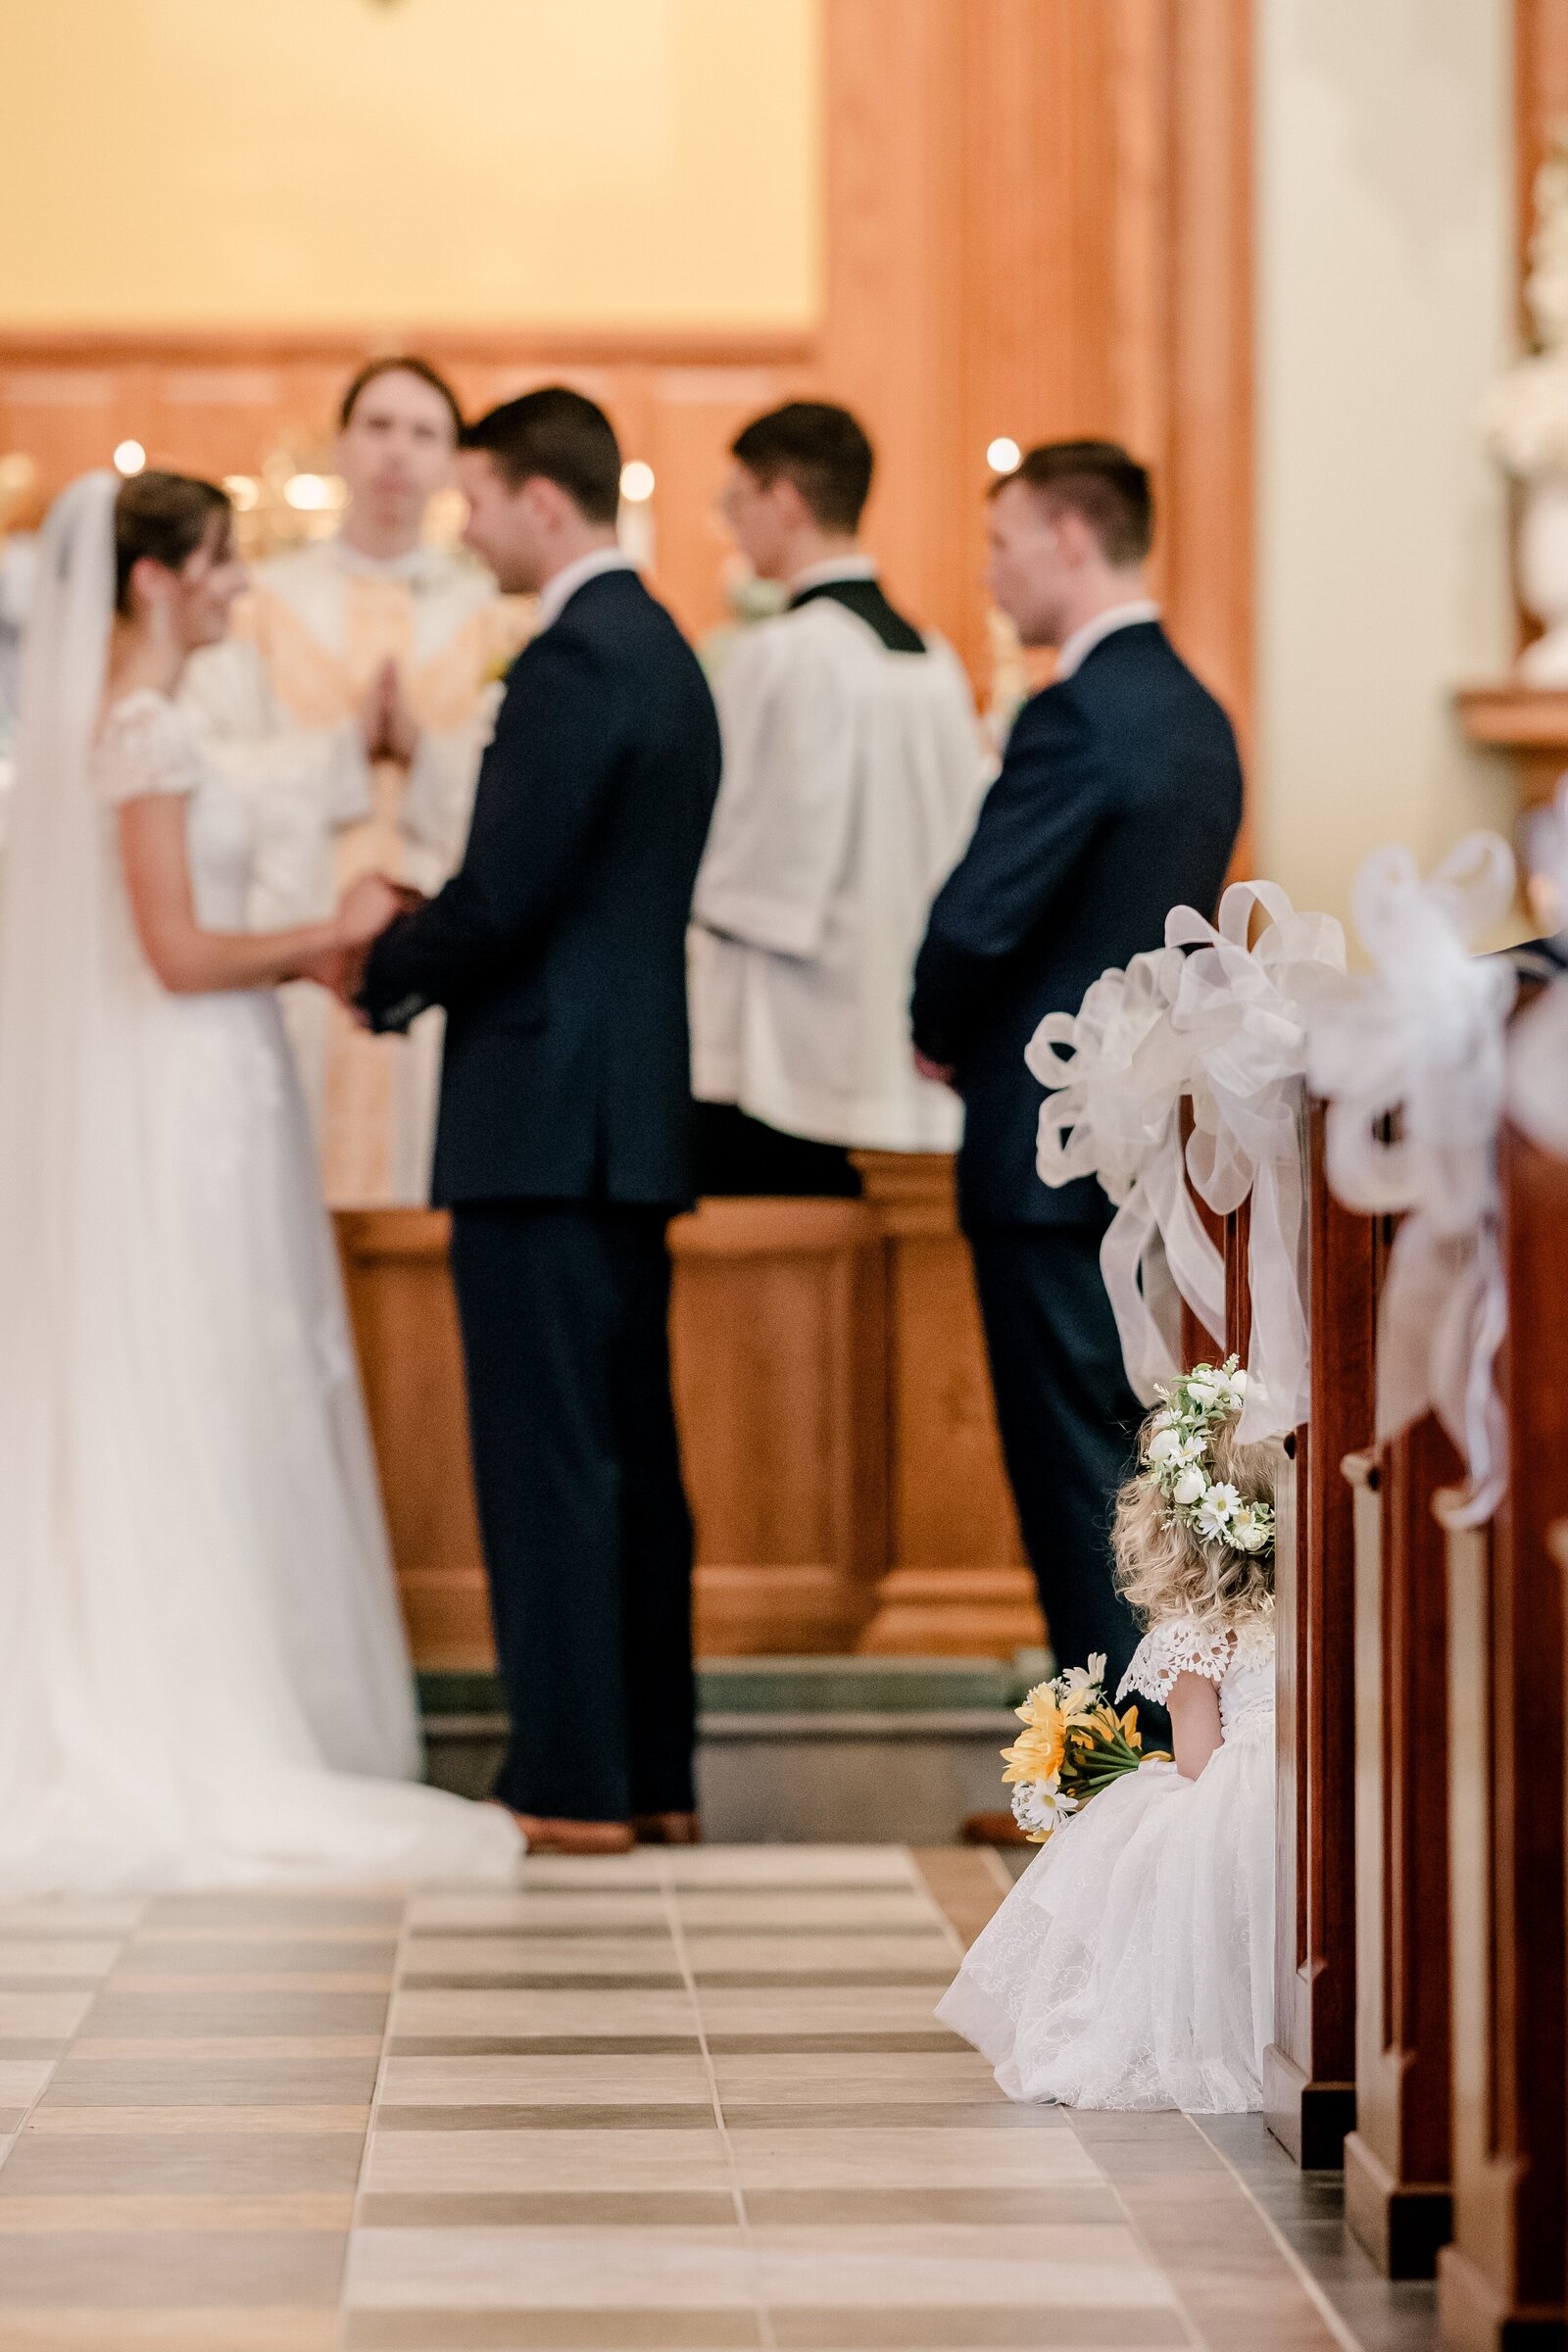 A flower girl peeking out from the pews during a Catholic wedding ceremony in Northern Virginia